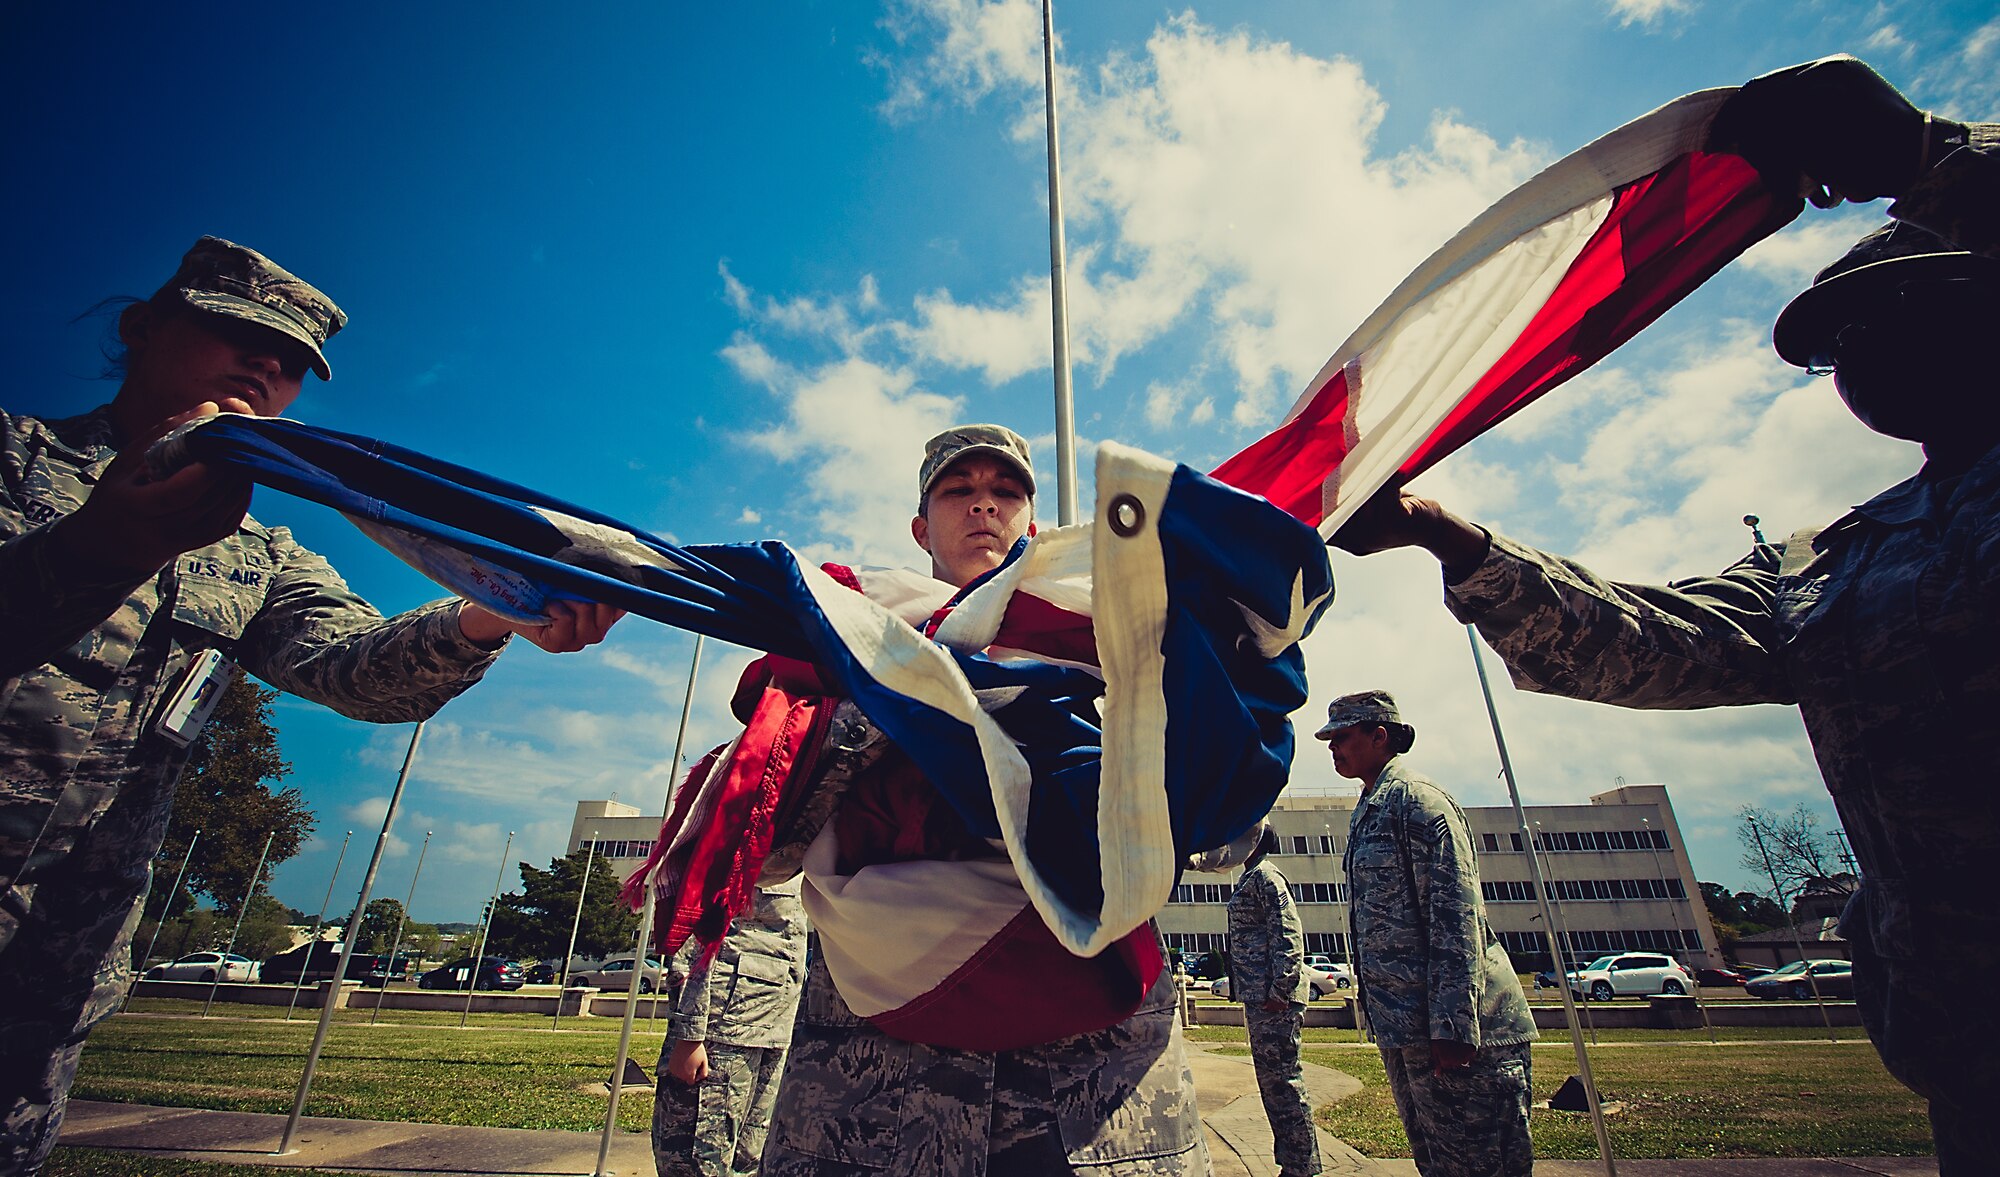 Master Sgt. Deaira Smith, Air Force Operational Test and Evaluation Center, Detachment 2, holds the flag as members of the flag detail grab the corners during the practice prior to the retreat ceremony March 29.  The flag detail and flight positions were filled by women in honor of Women’s History Month.  More than 30 women participated in the ceremony.  To see more photos of the all-women flag detail go to facebook.com/teameglin.  (U.S. Air Force photo/Samuel King Jr.)